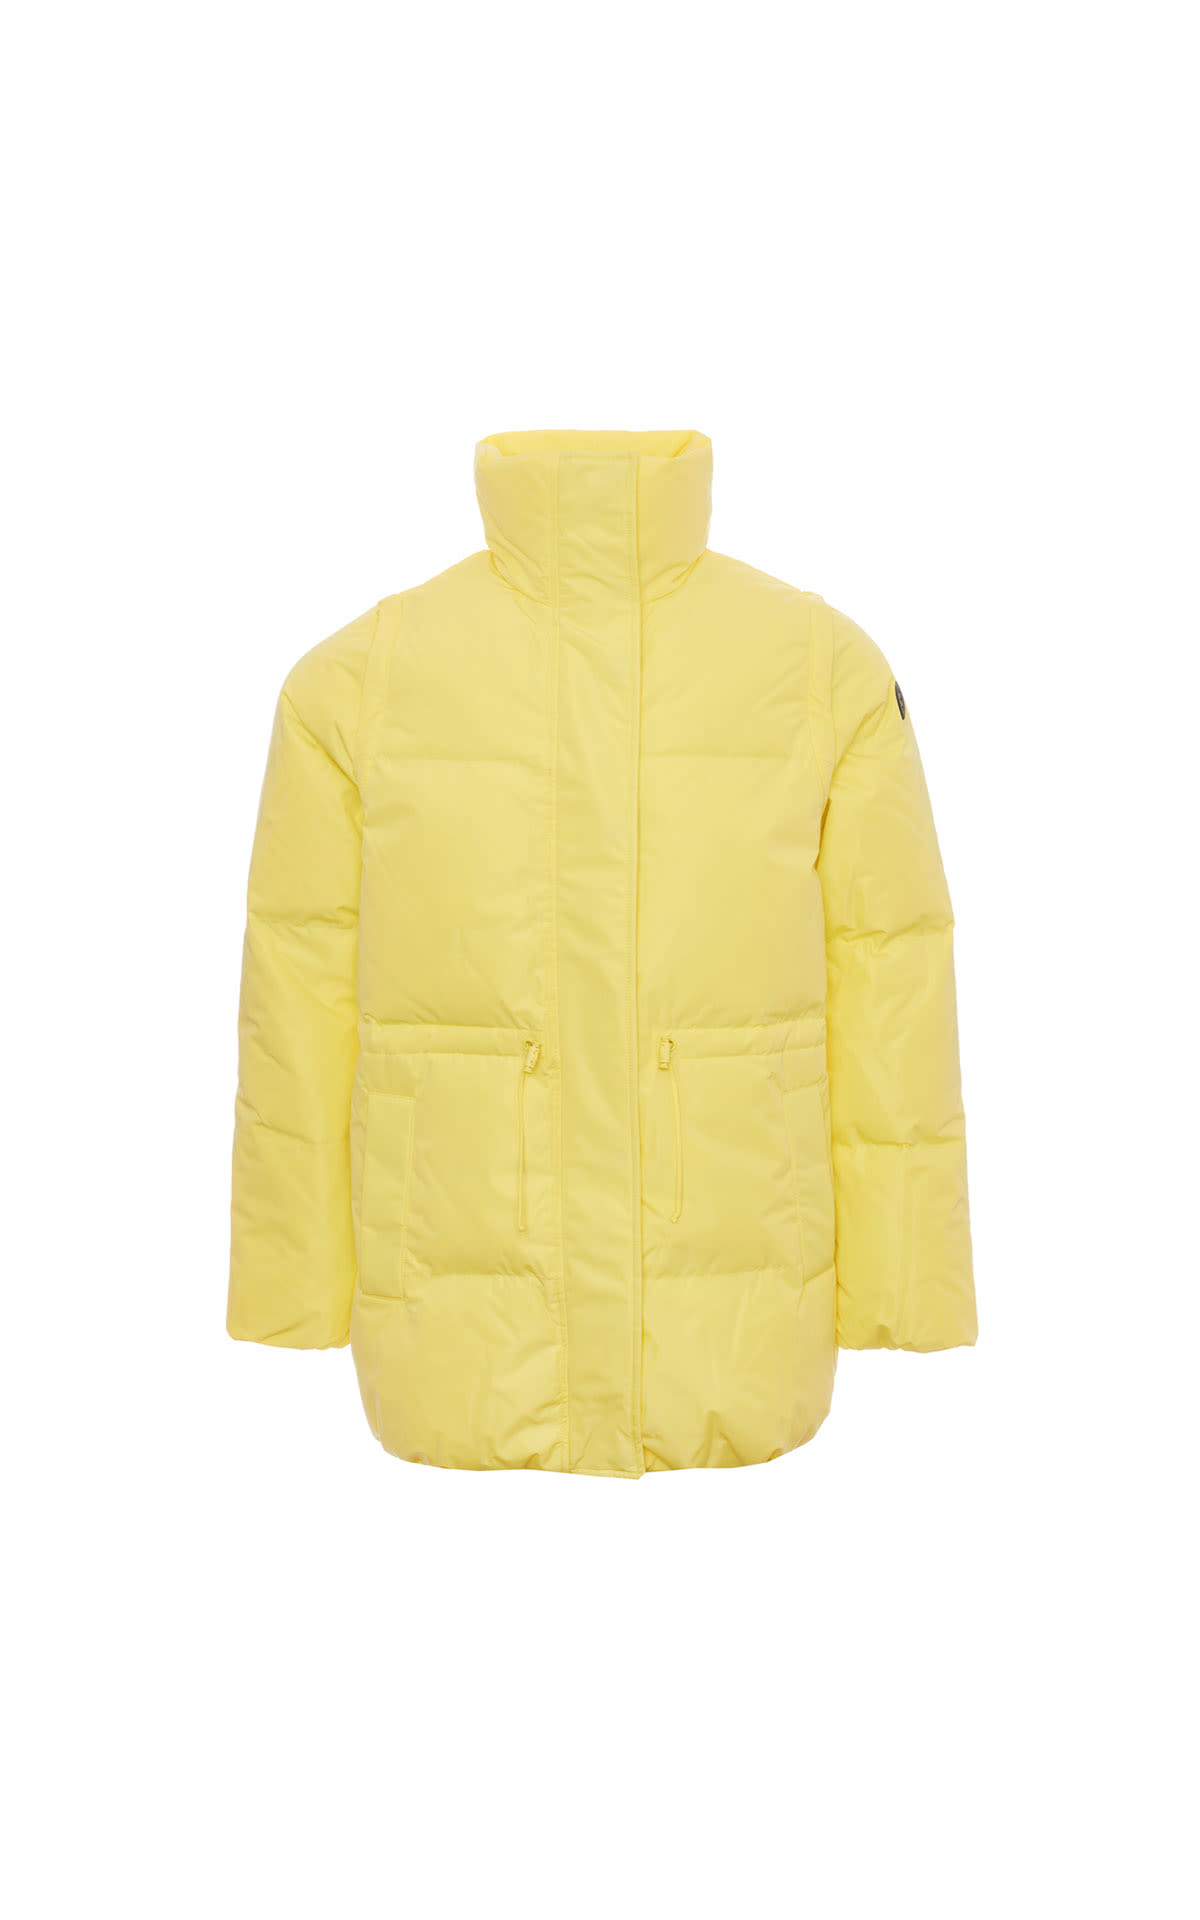 Sweaty Betty  Beyond the street puffer jacket from Bicester Village